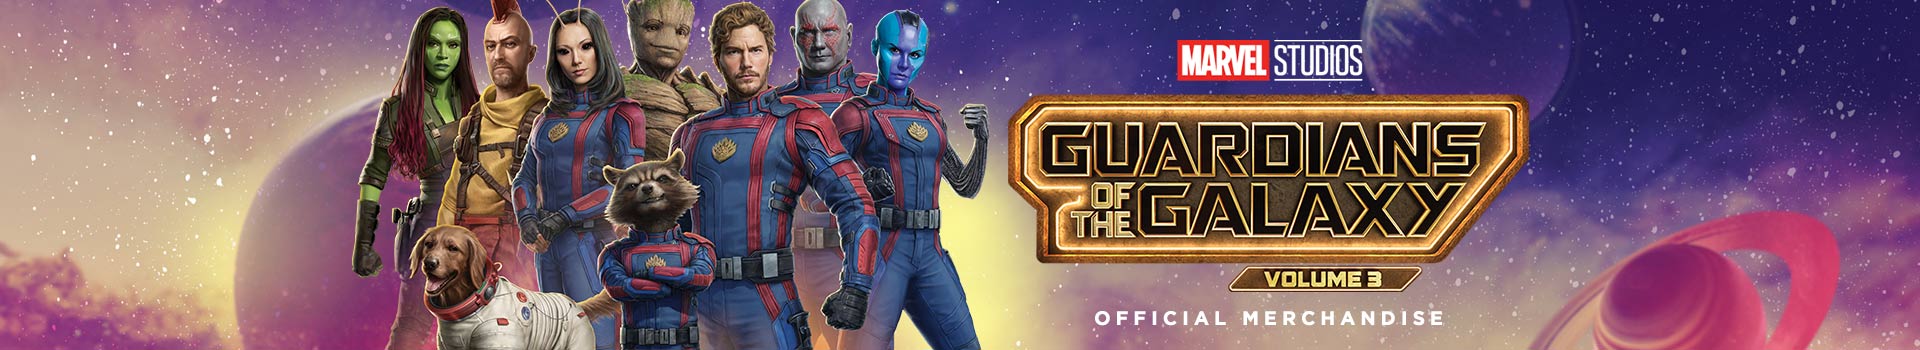 Guardians Of The Galaxy - Official Merchandise